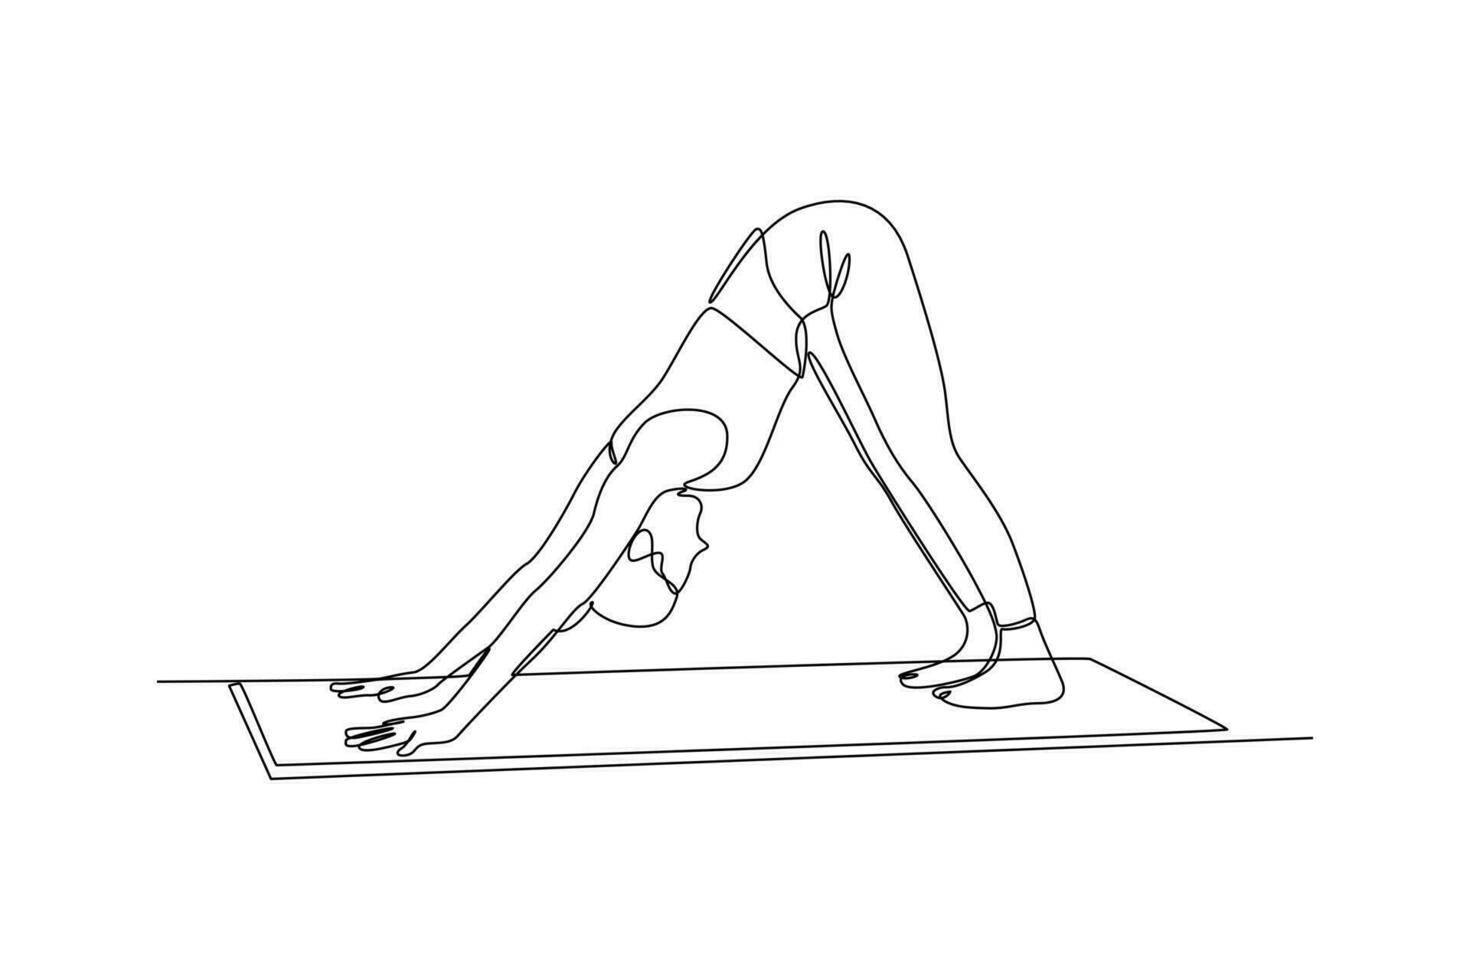 Continuous one-line drawing girl practicing yoga. Class it up concept. Single line drawing design graphic vector illustration